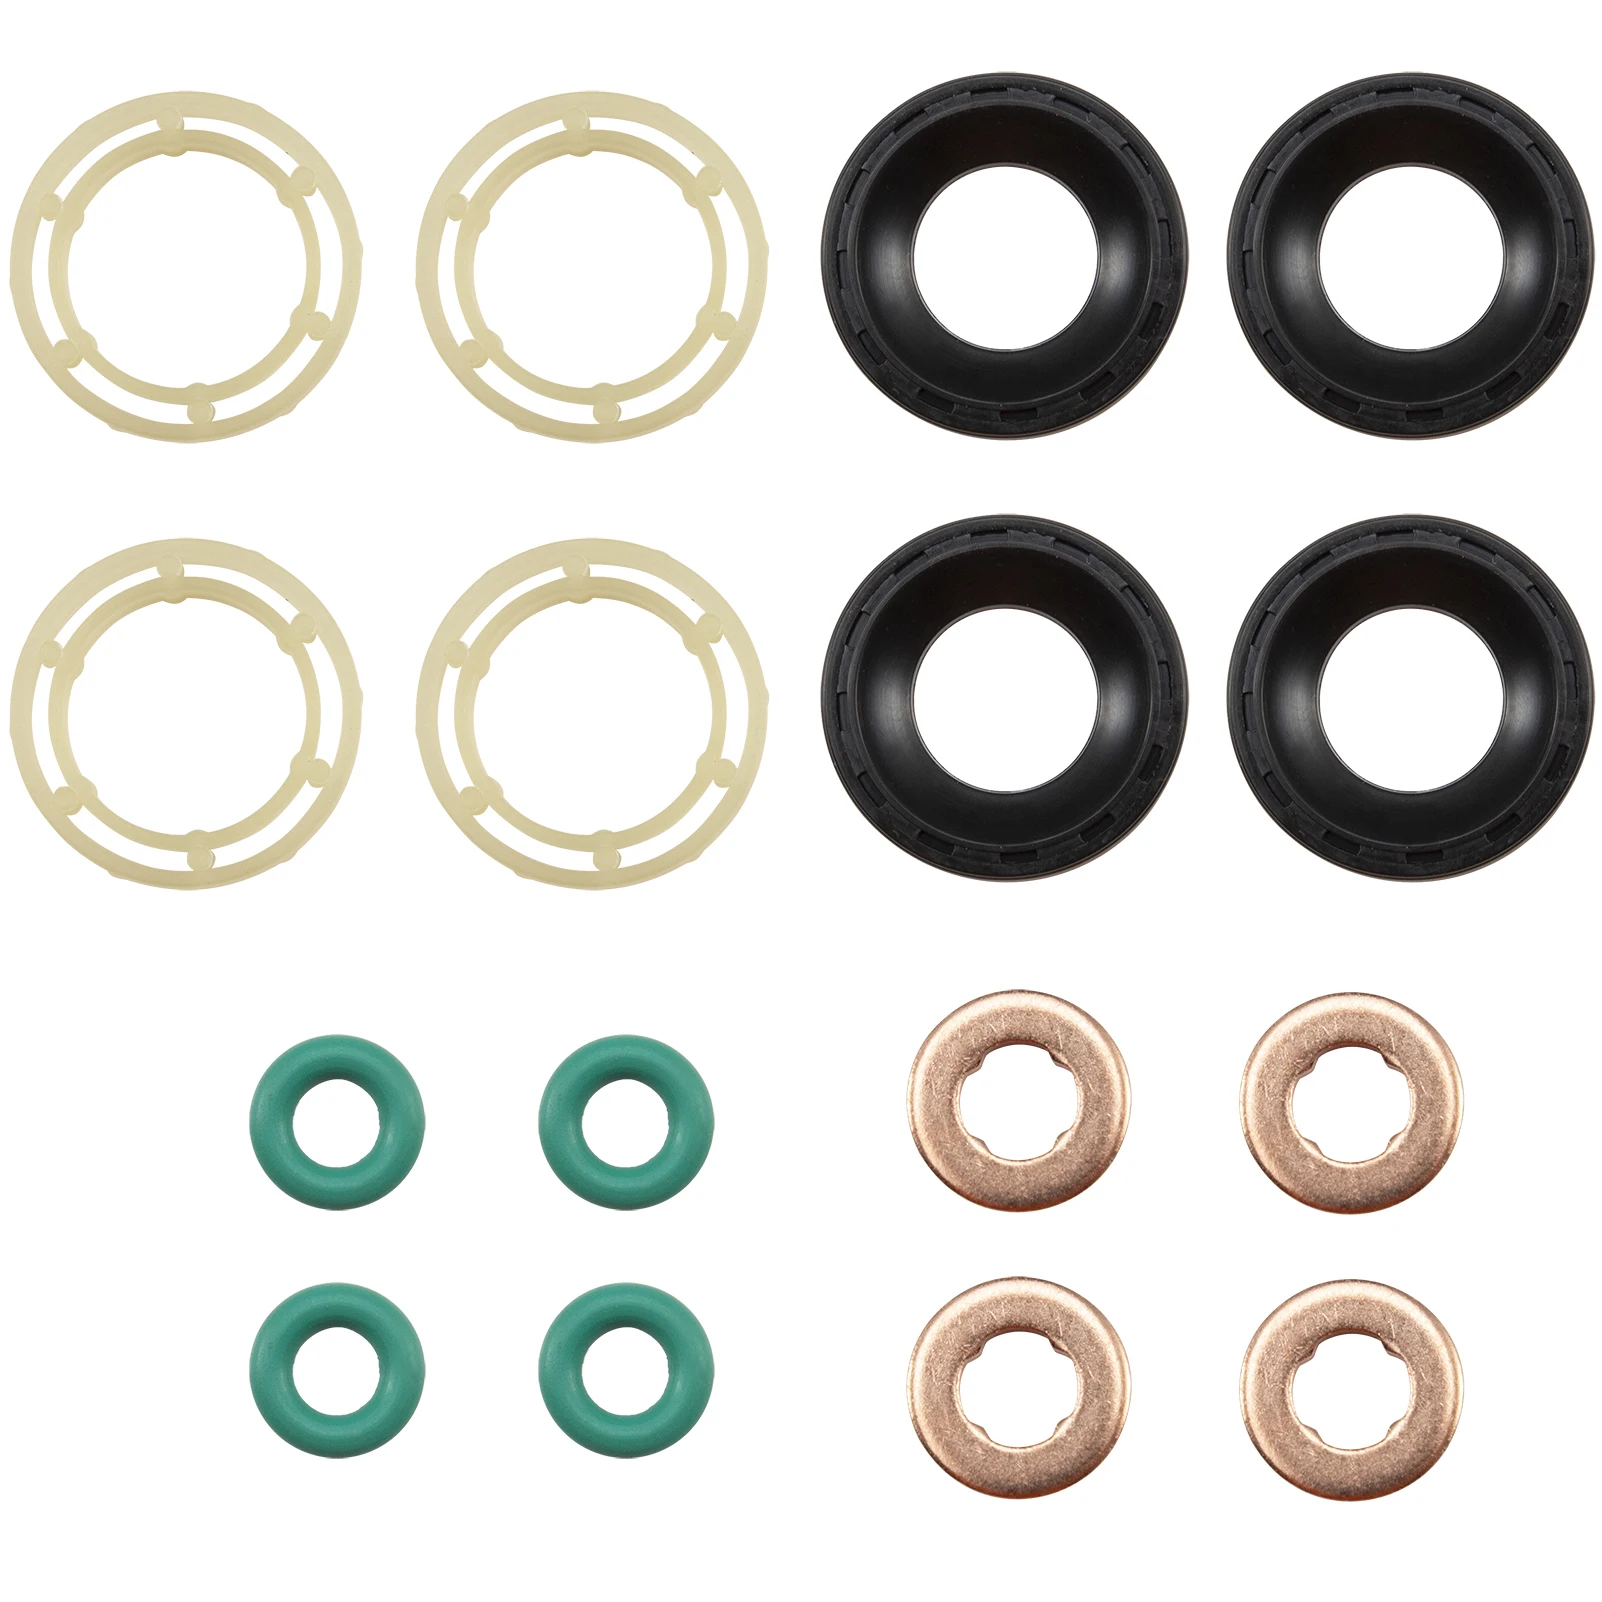 

16 Pcs/Kit Diesel Injector Seal Washer O-ring For Ford Fiesta V Focus II Fusion JU 1.6TDCi 1314368 Diesel Injector Seals Kit